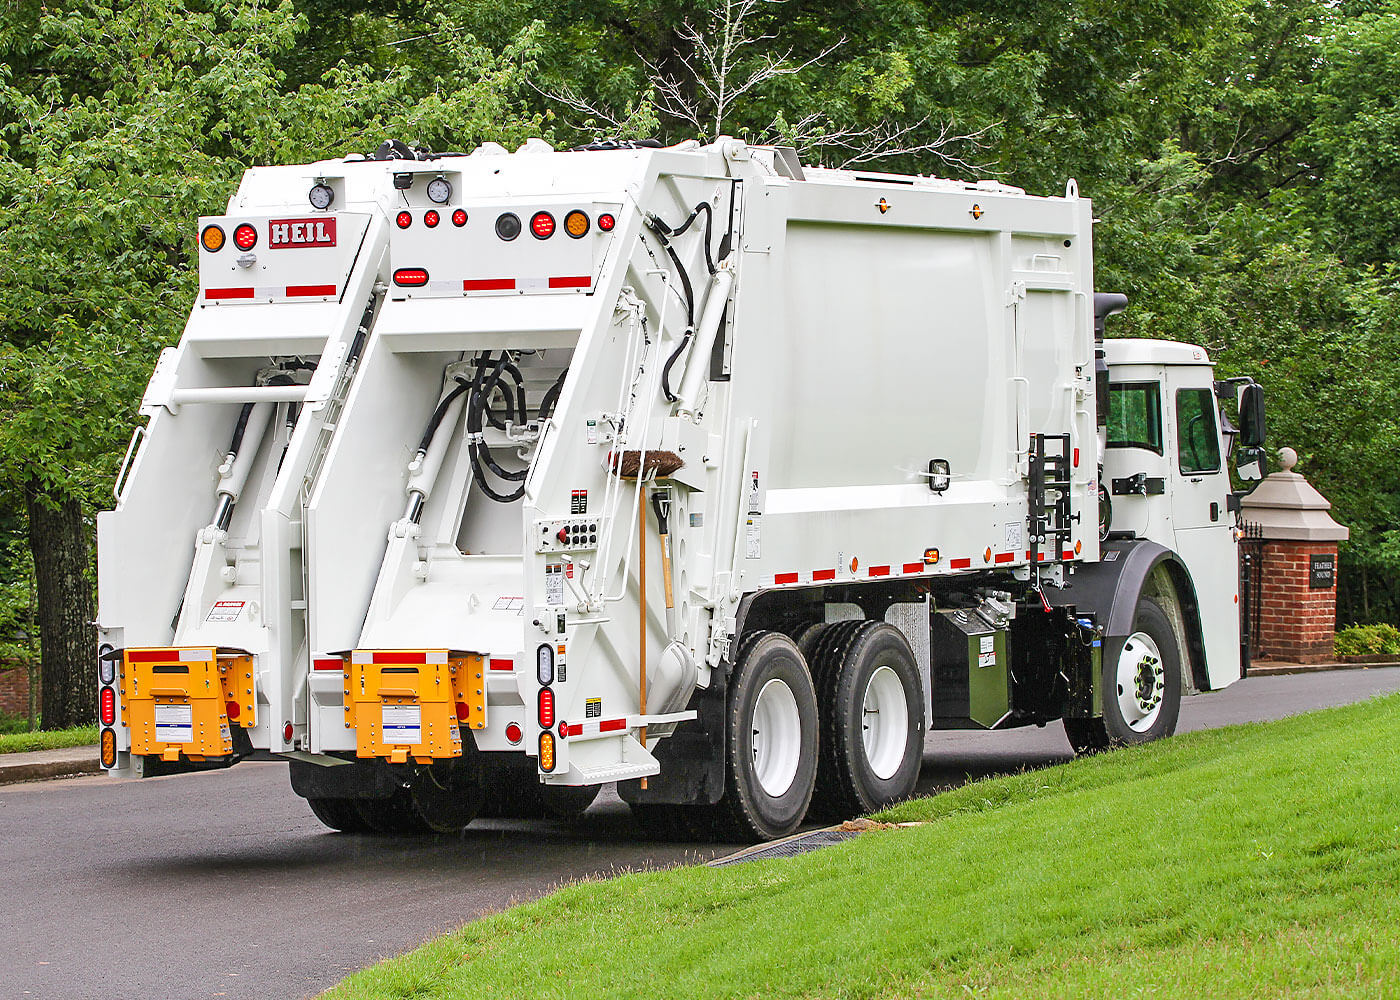 Heil split body rear loader garbage trucks with two hopper compartments